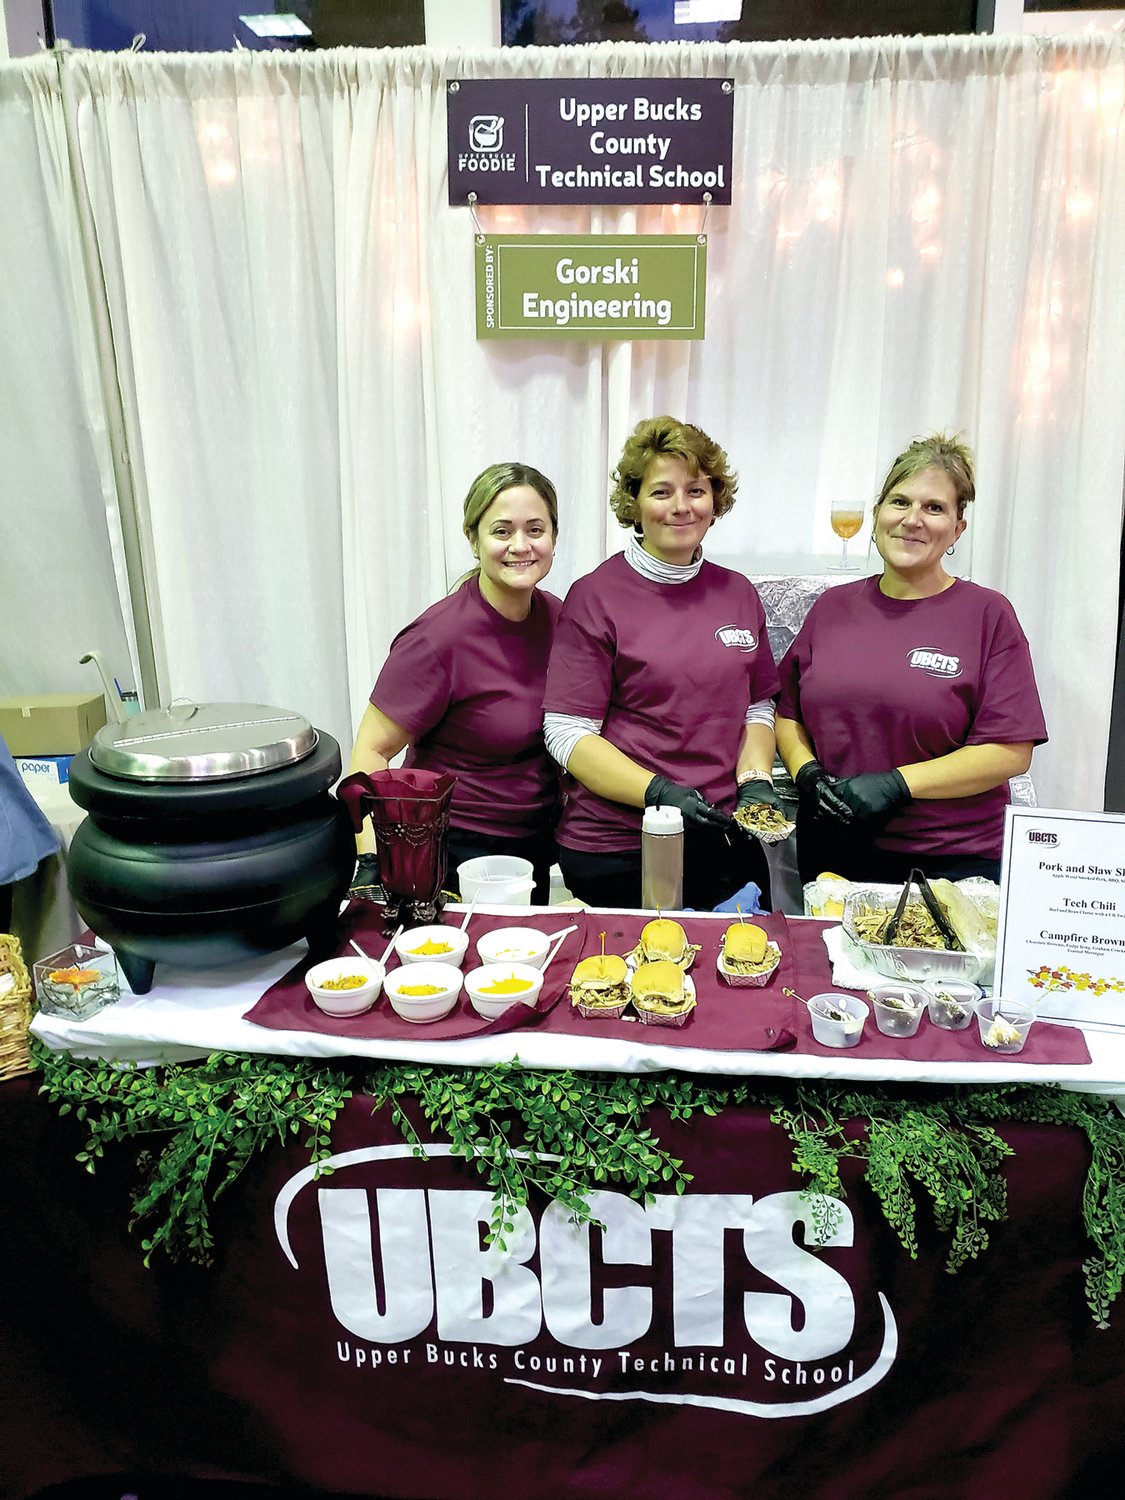 Representatives from Upper Bucks County Technical School stand ready at the 14th annual Upper Bucks Foodie.